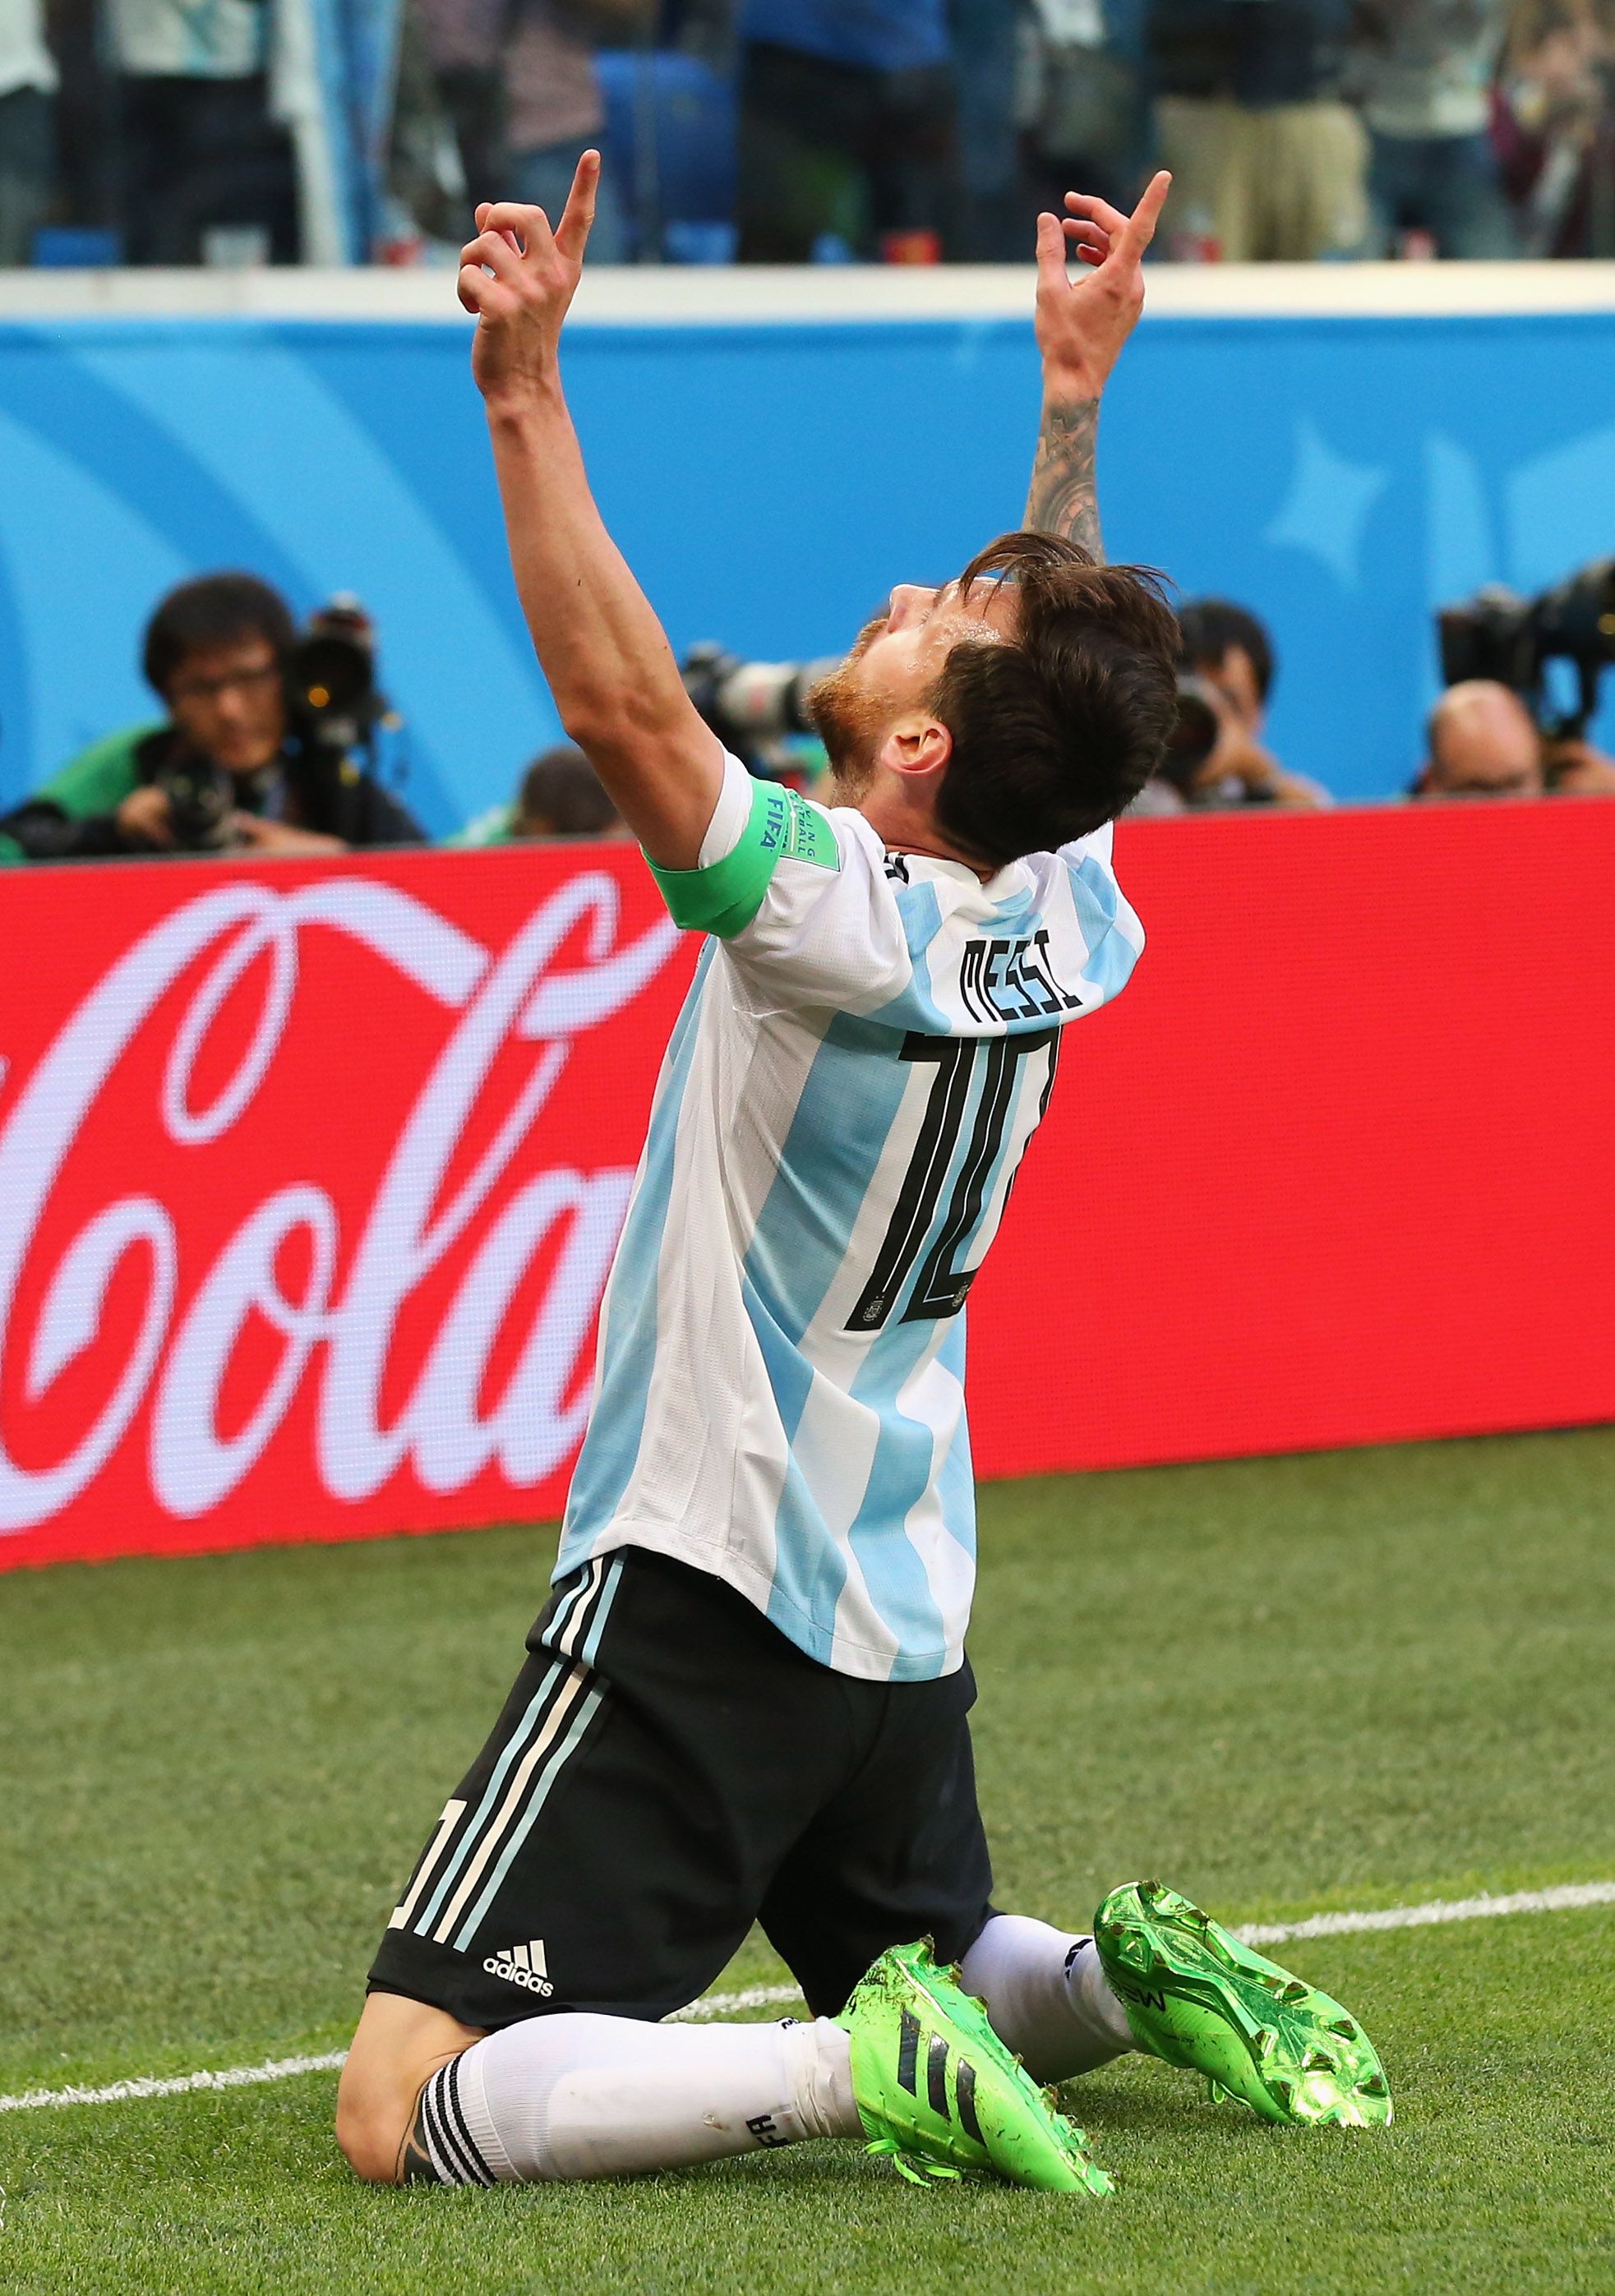 Lionel Messi celebrates after scoring at the World Cup